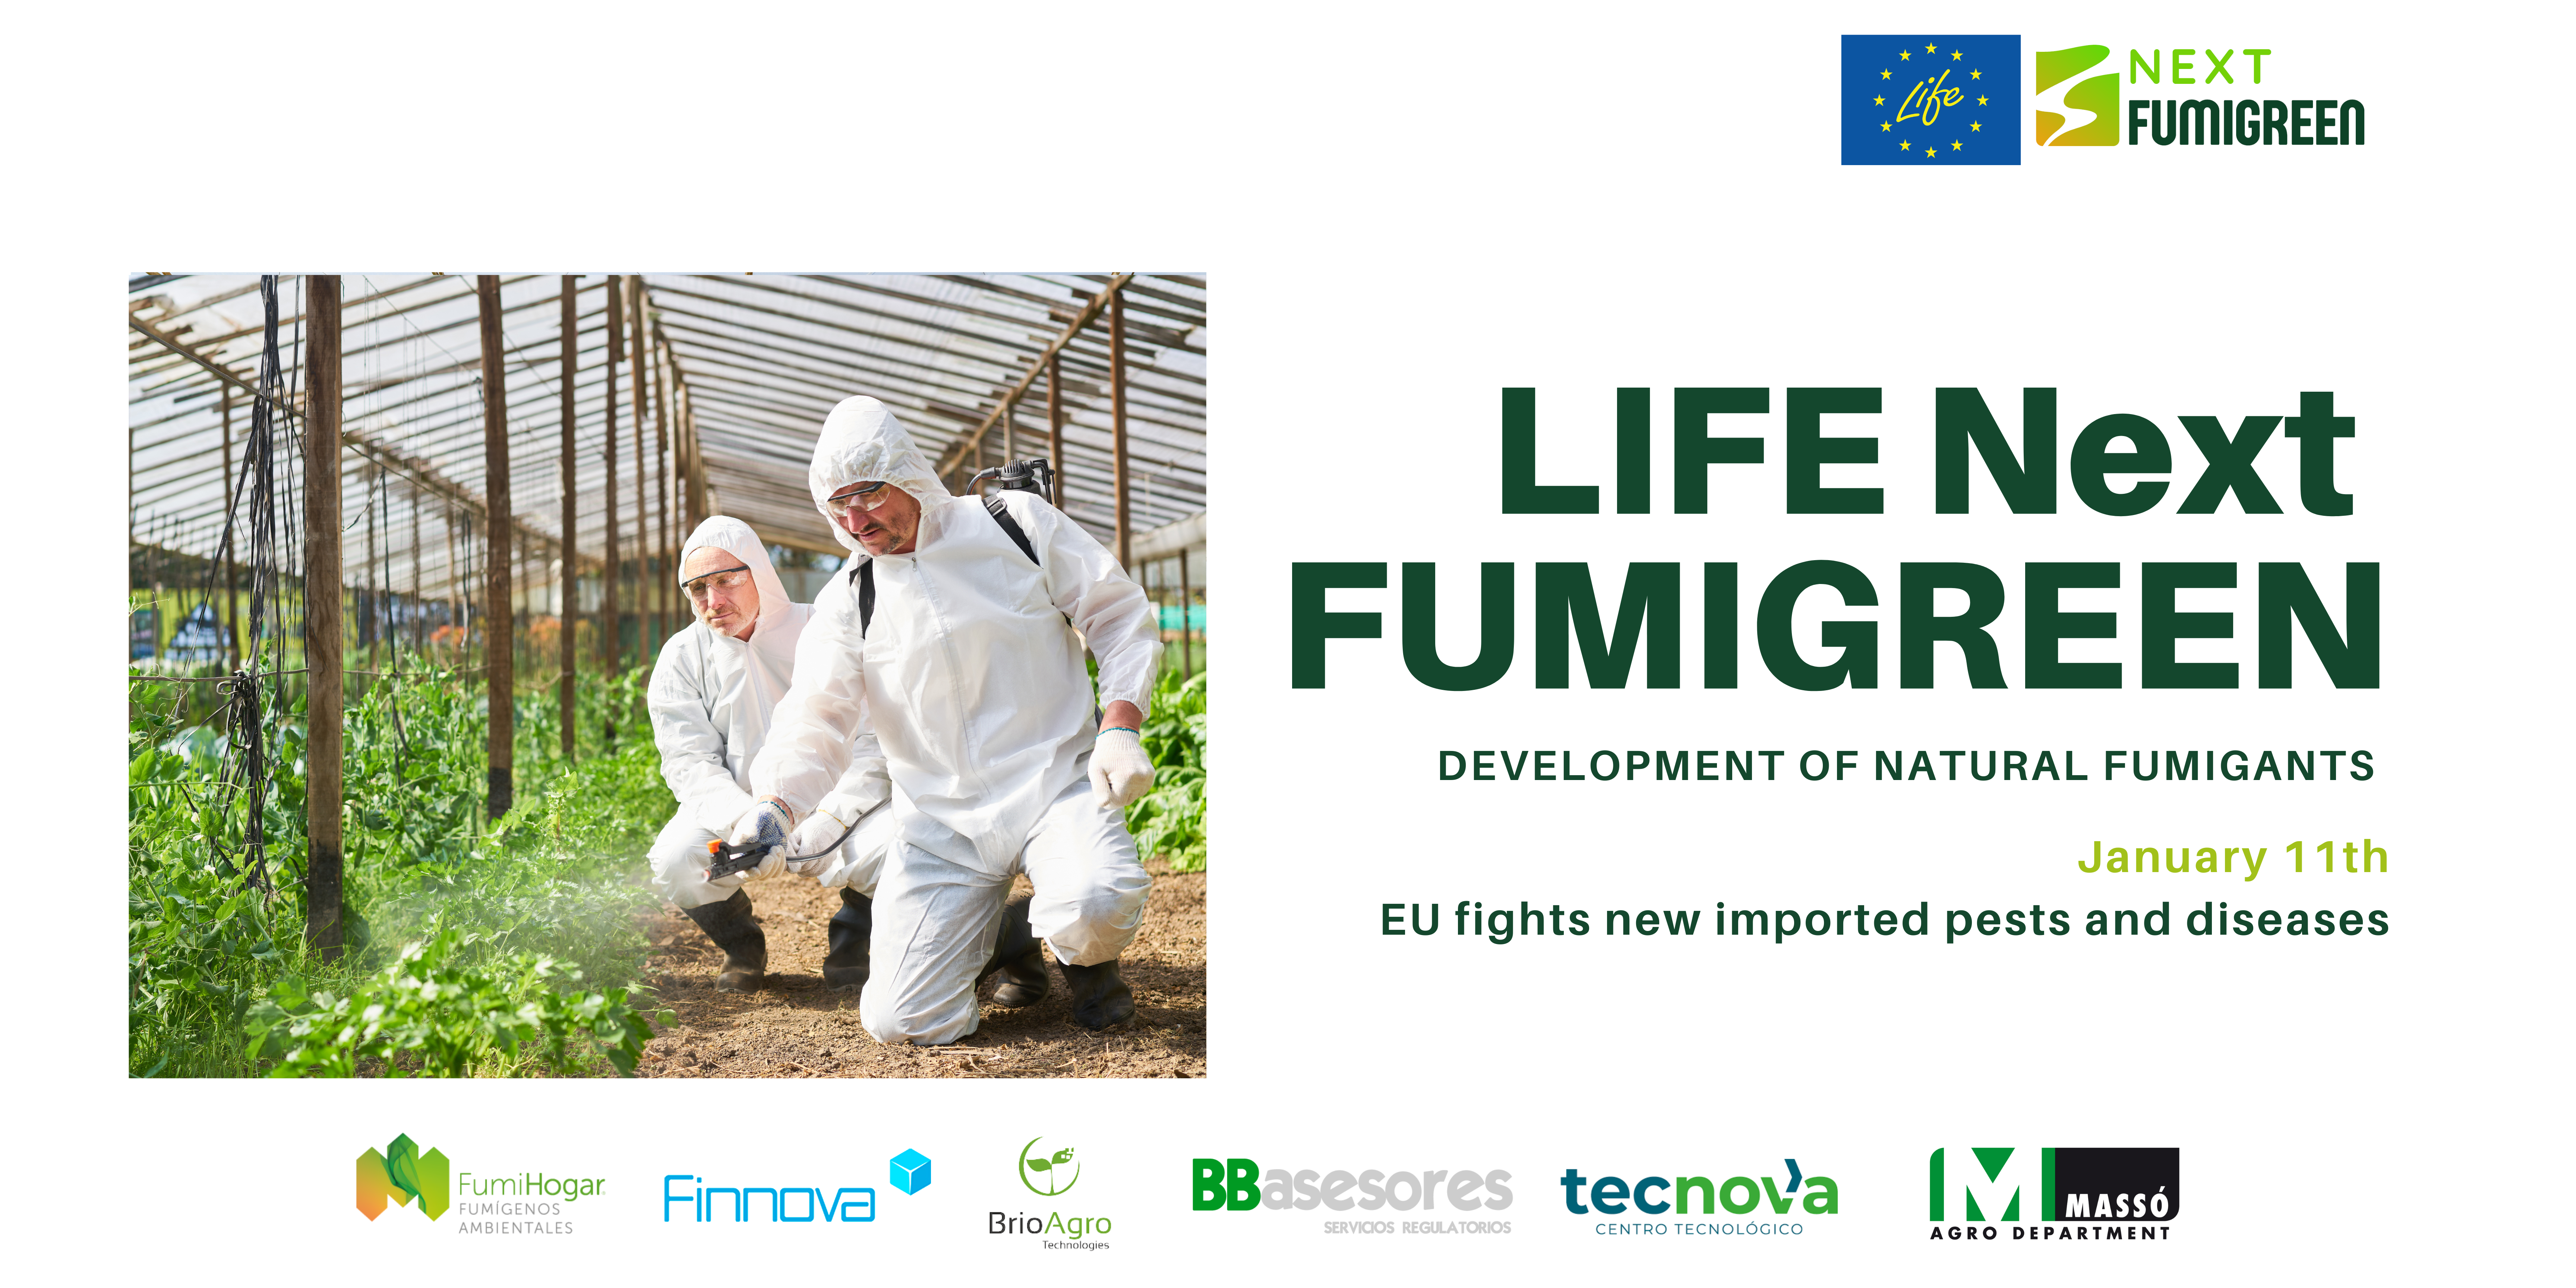 LIFE NextFUMIGREEN supports the EU’s fight against new imported pests and diseases